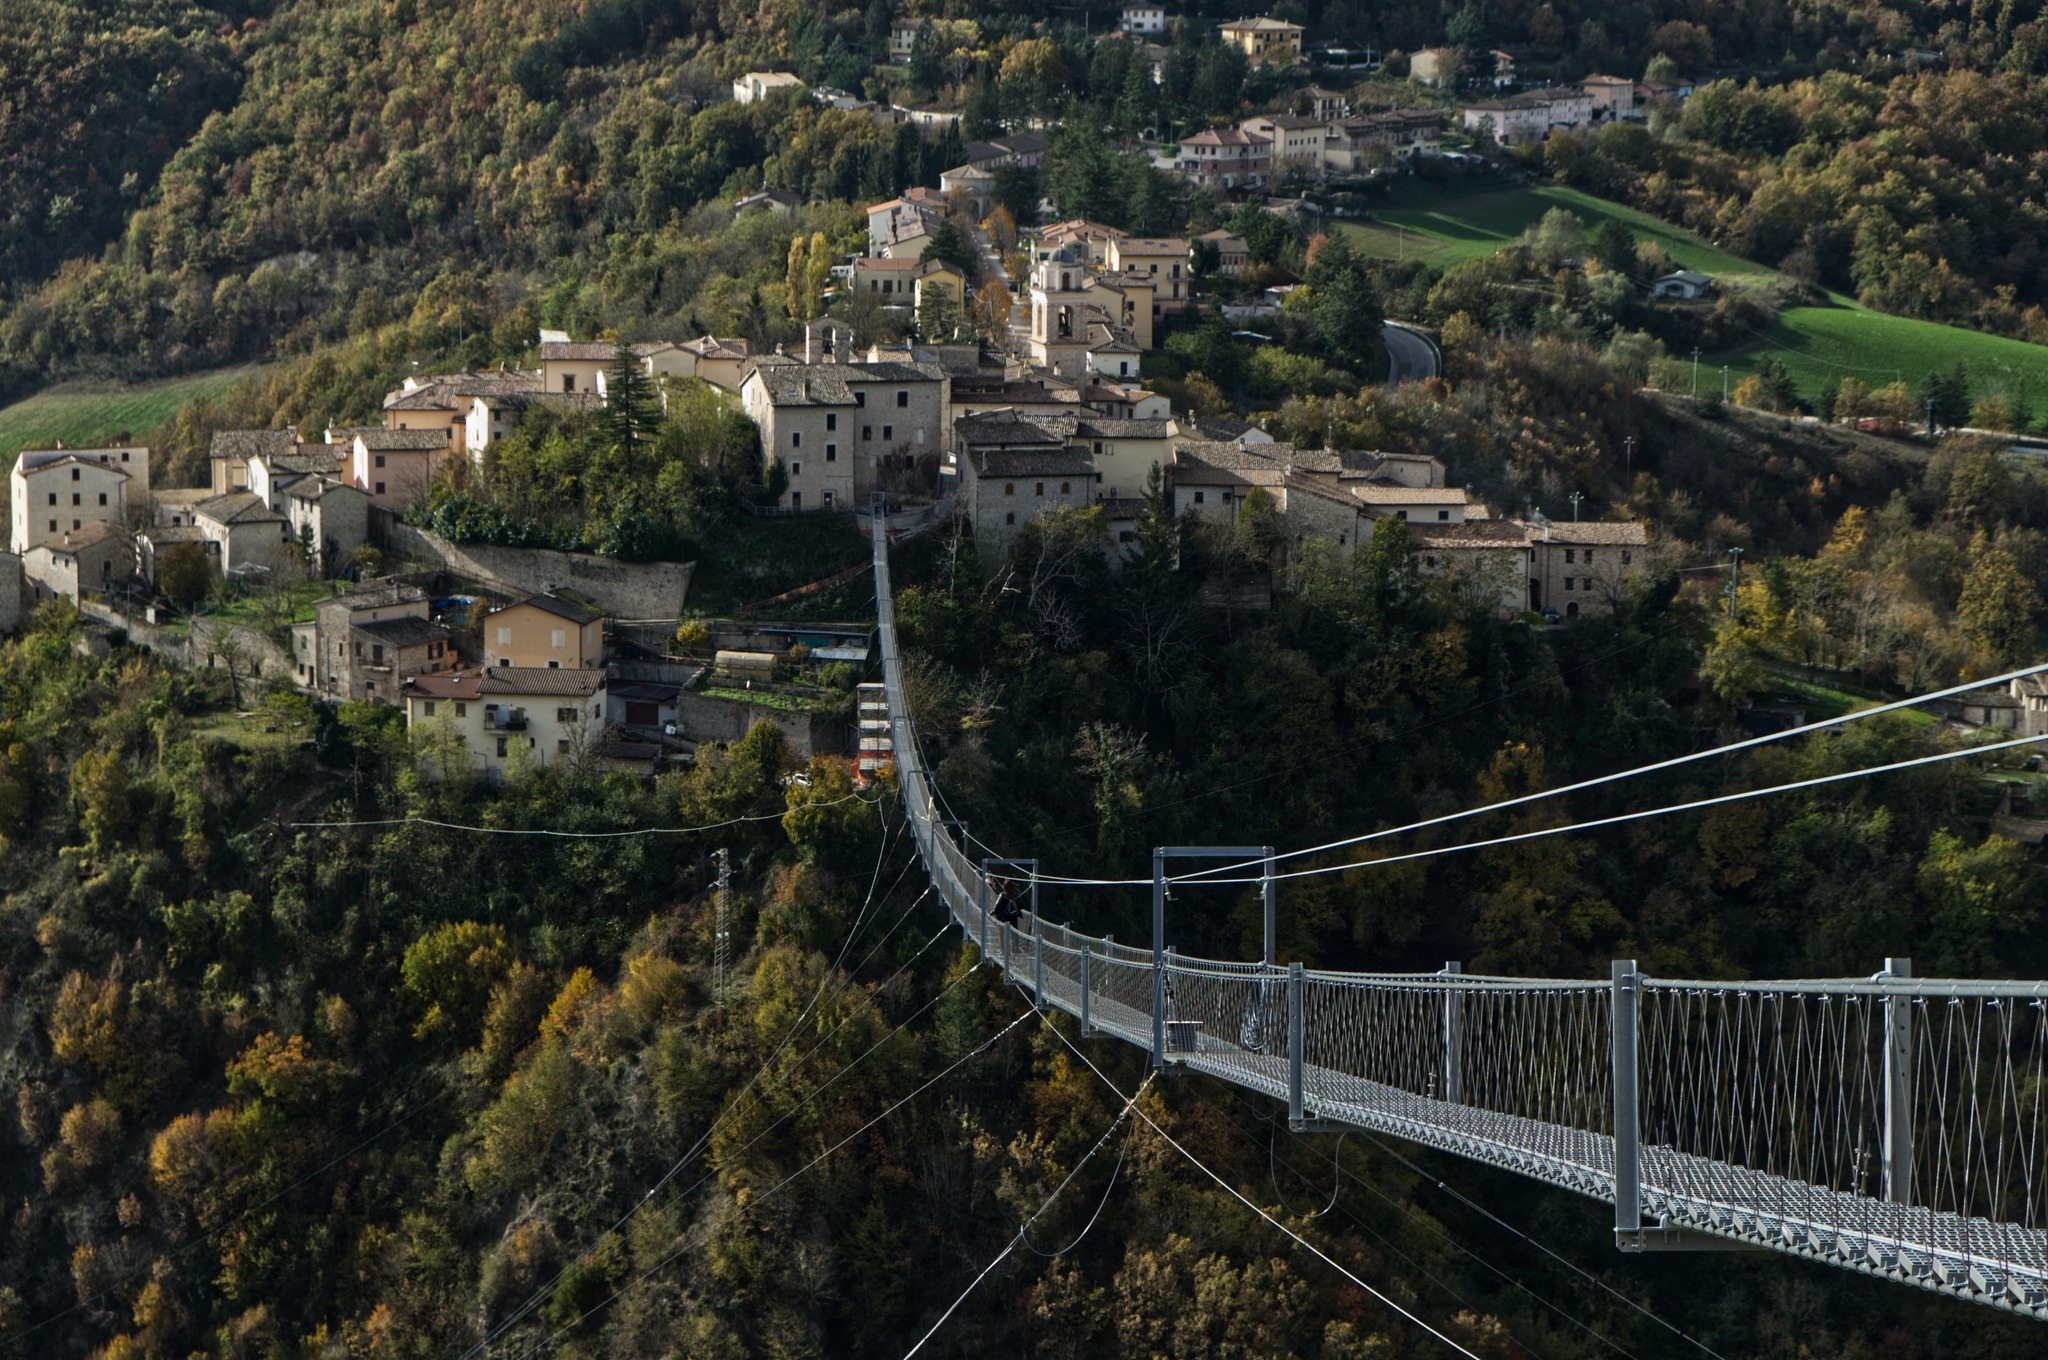 Will you be brave enough to get through it?  Europe got a new pedestrian suspension bridge